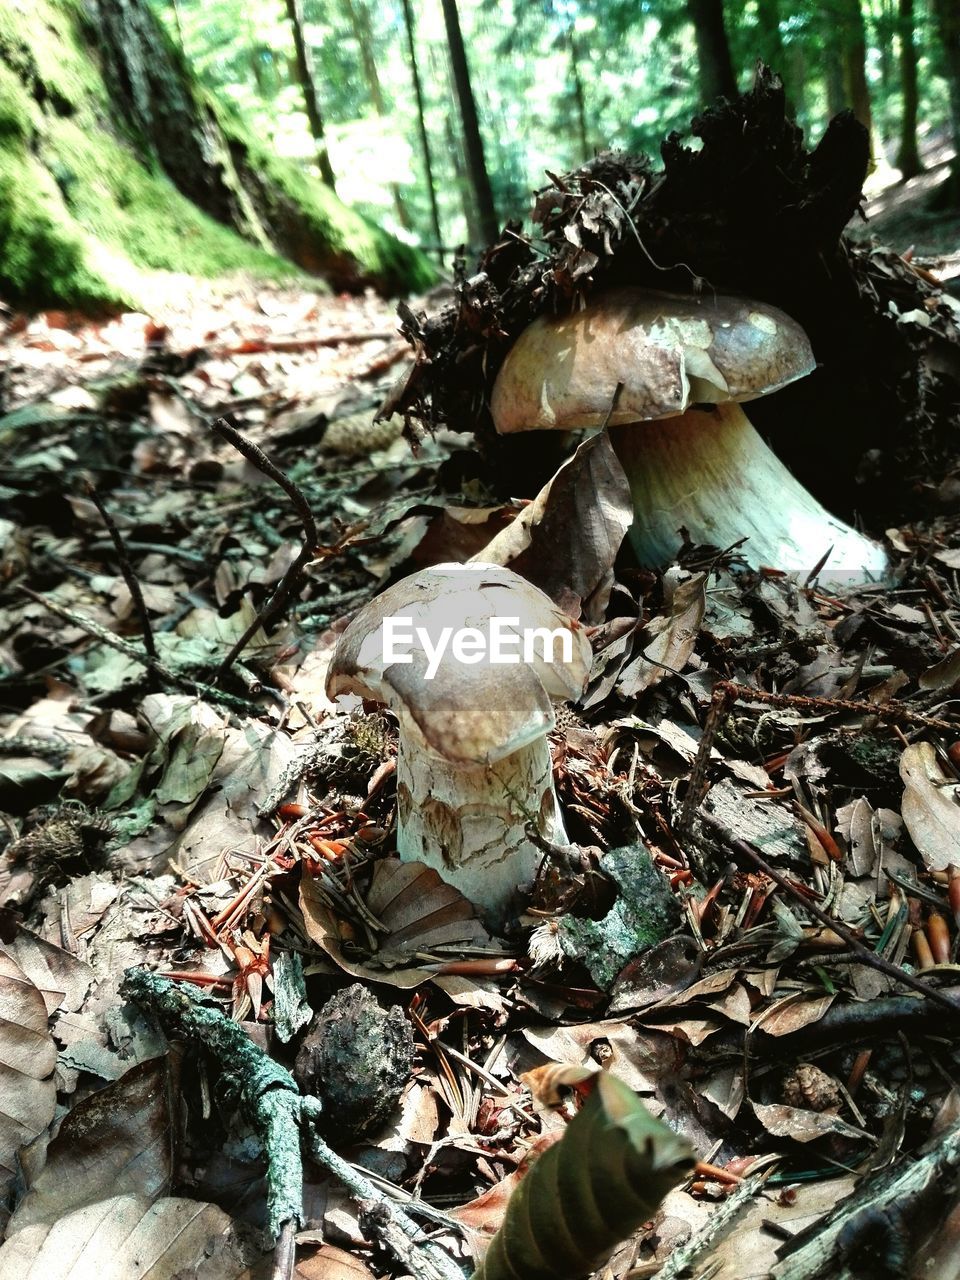 HIGH ANGLE VIEW OF MUSHROOMS GROWING ON LAND